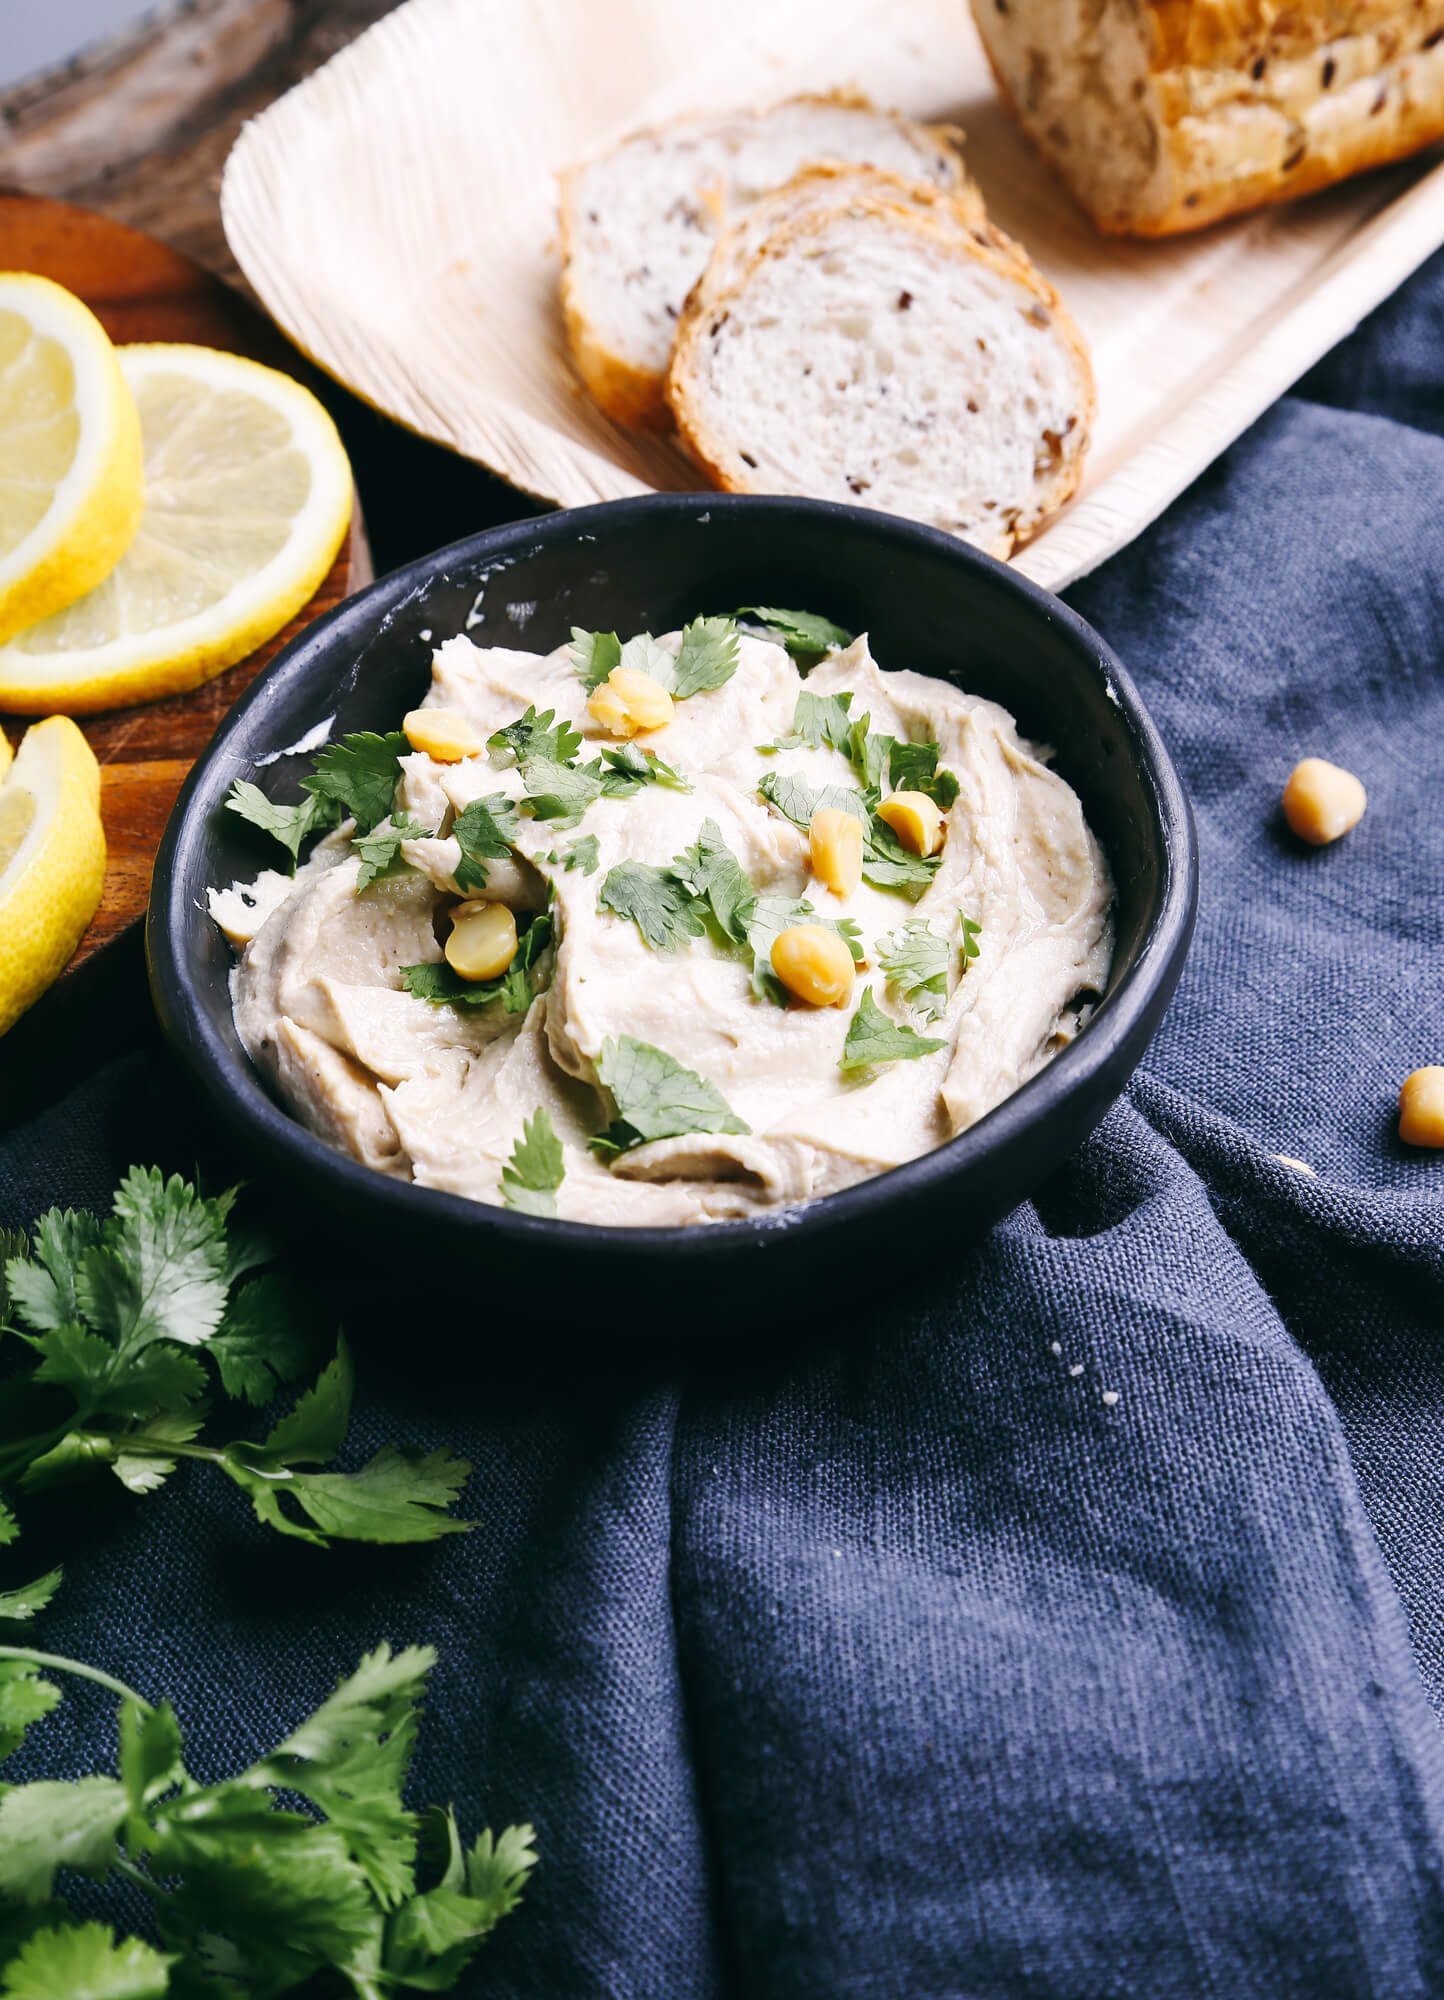 Artichoke hummus in a bowl with fresh bread, lemons, and parsley.